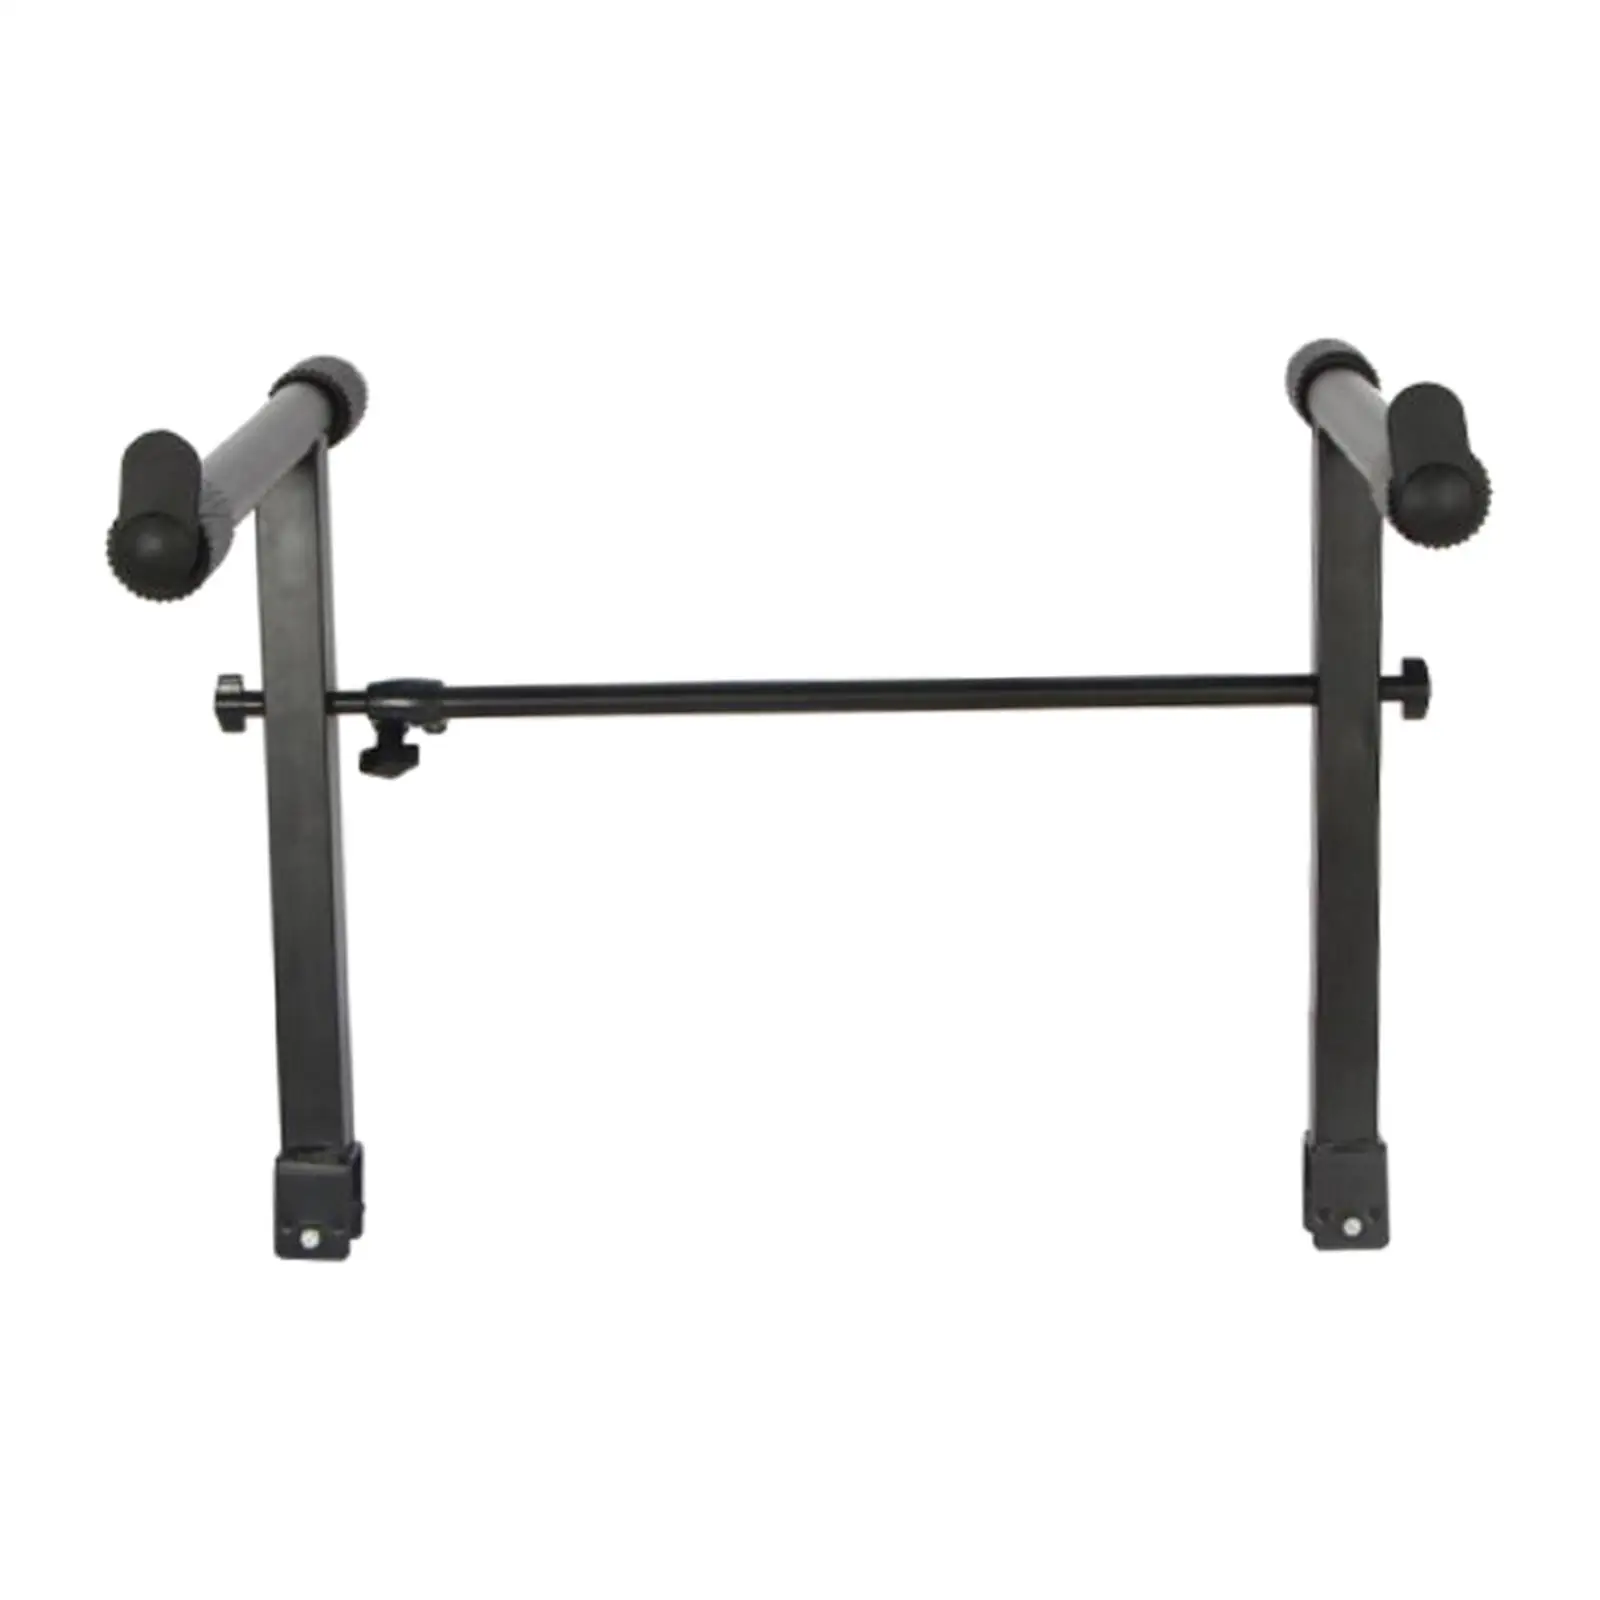 Musical Keyboard Stand Support Holder for Keyboard Instrument Accessories